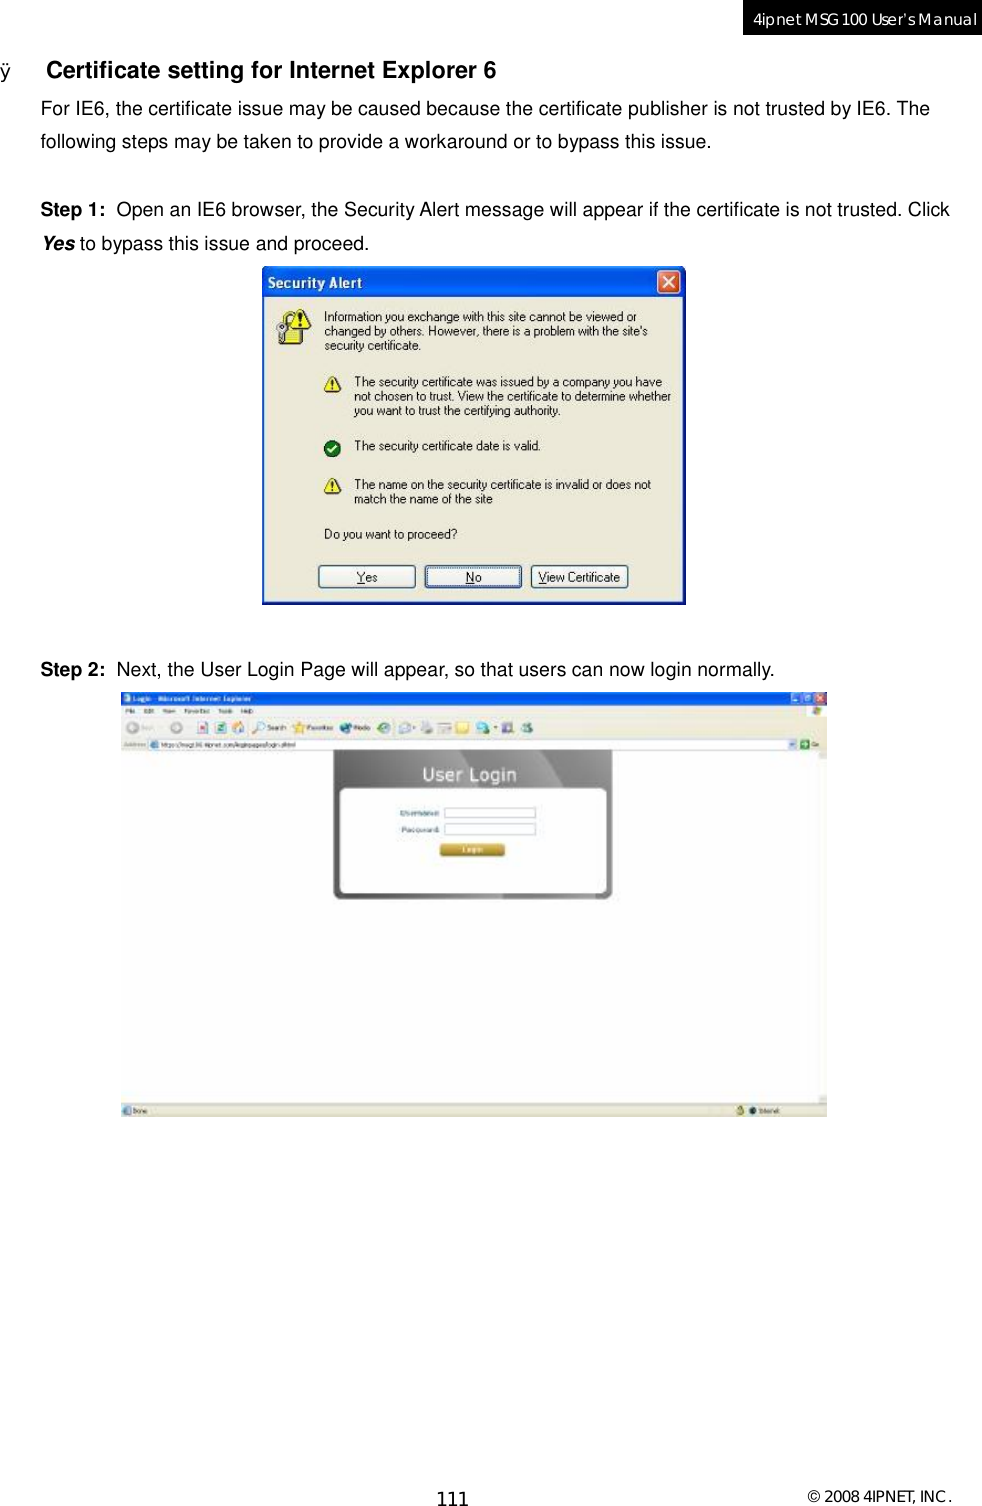  © 2008 4IPNET, INC. 111 4ipnet MSG100 User’s Manual  Ø Certificate setting for Internet Explorer 6 For IE6, the certificate issue may be caused because the certificate publisher is not trusted by IE6. The following steps may be taken to provide a workaround or to bypass this issue.   Step 1:  Open an IE6 browser, the Security Alert message will appear if the certificate is not trusted. Click Yes to bypass this issue and proceed.   Step 2:  Next, the User Login Page will appear, so that users can now login normally.     